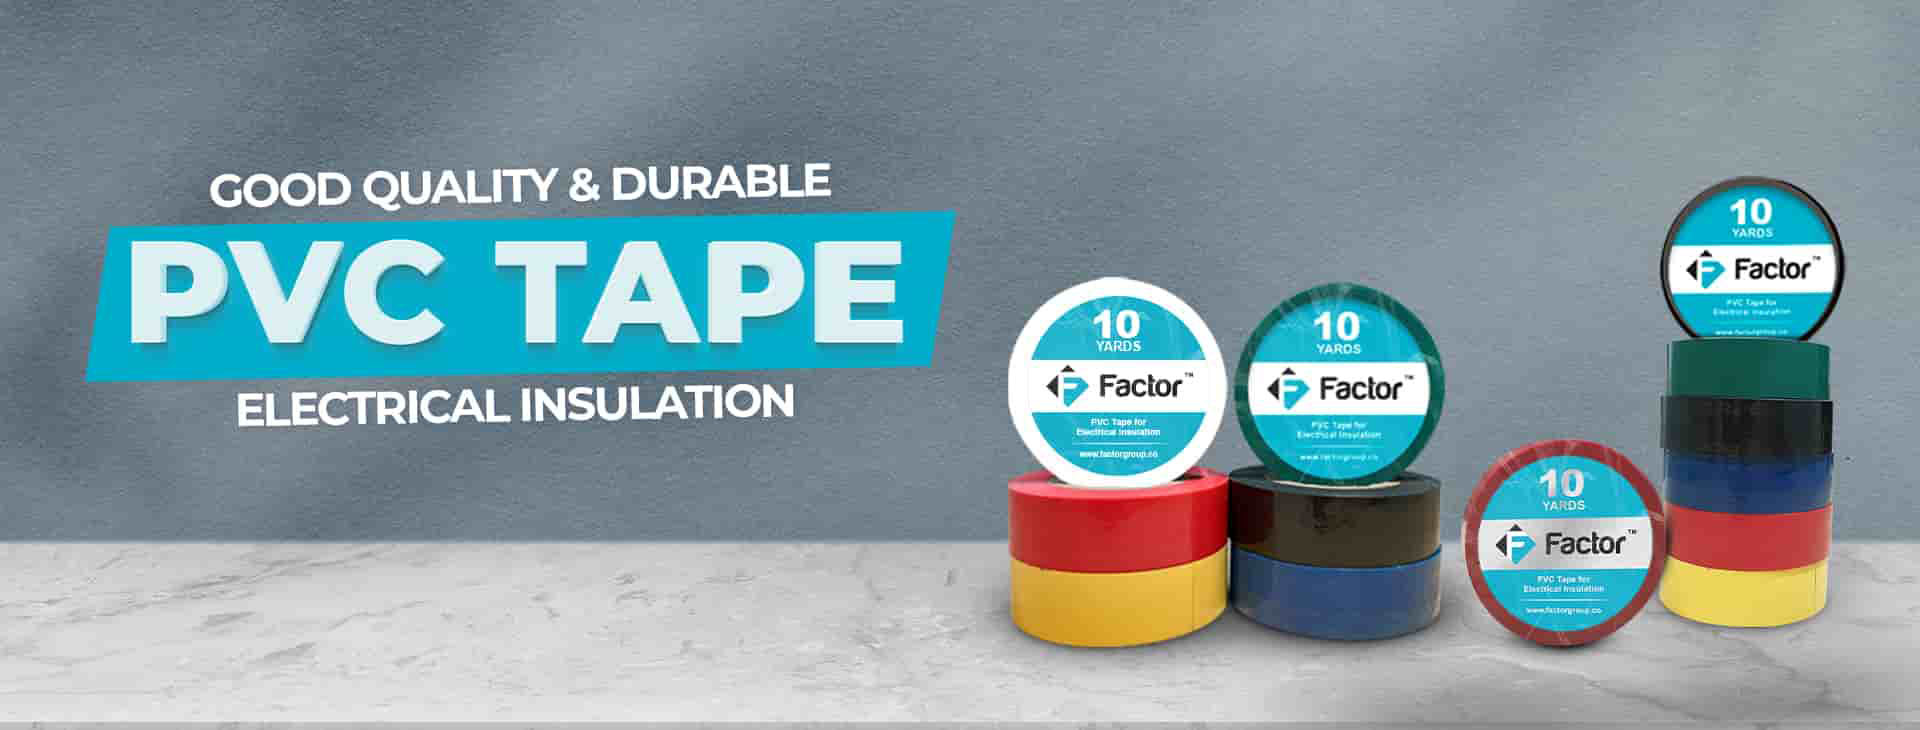 5 reasons to use pvc tape